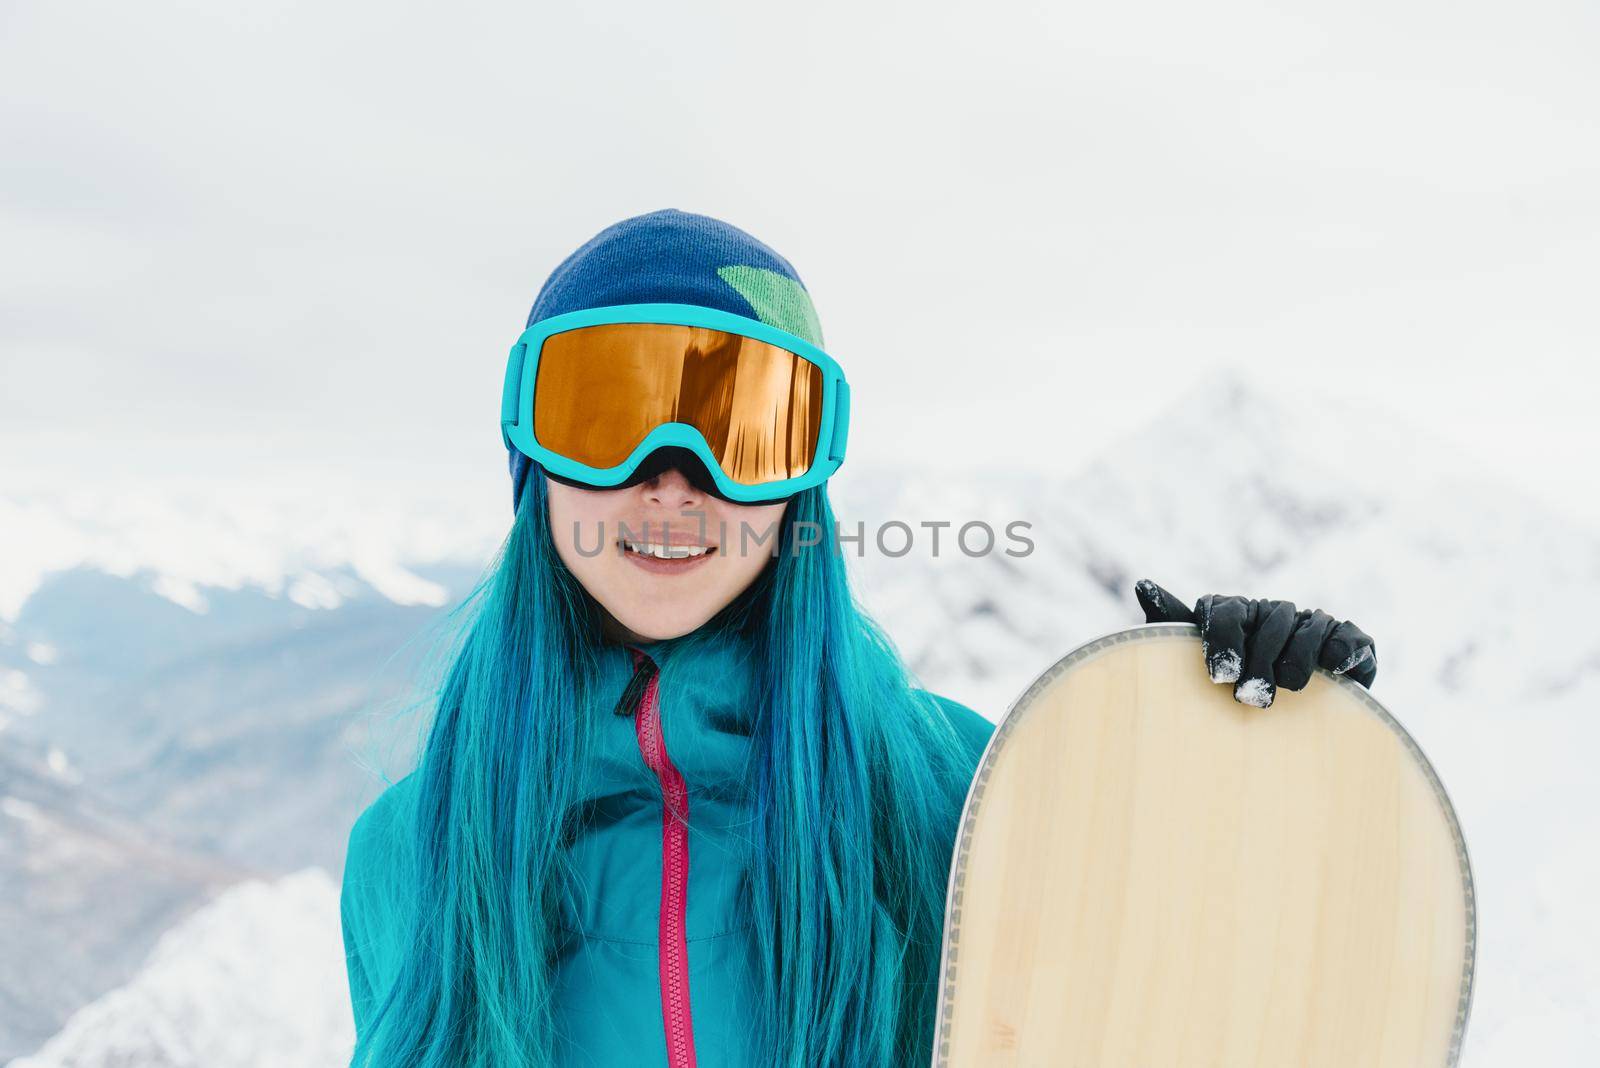 Smiling young woman with blue hair in sunglasses standing with snowboard in winter.